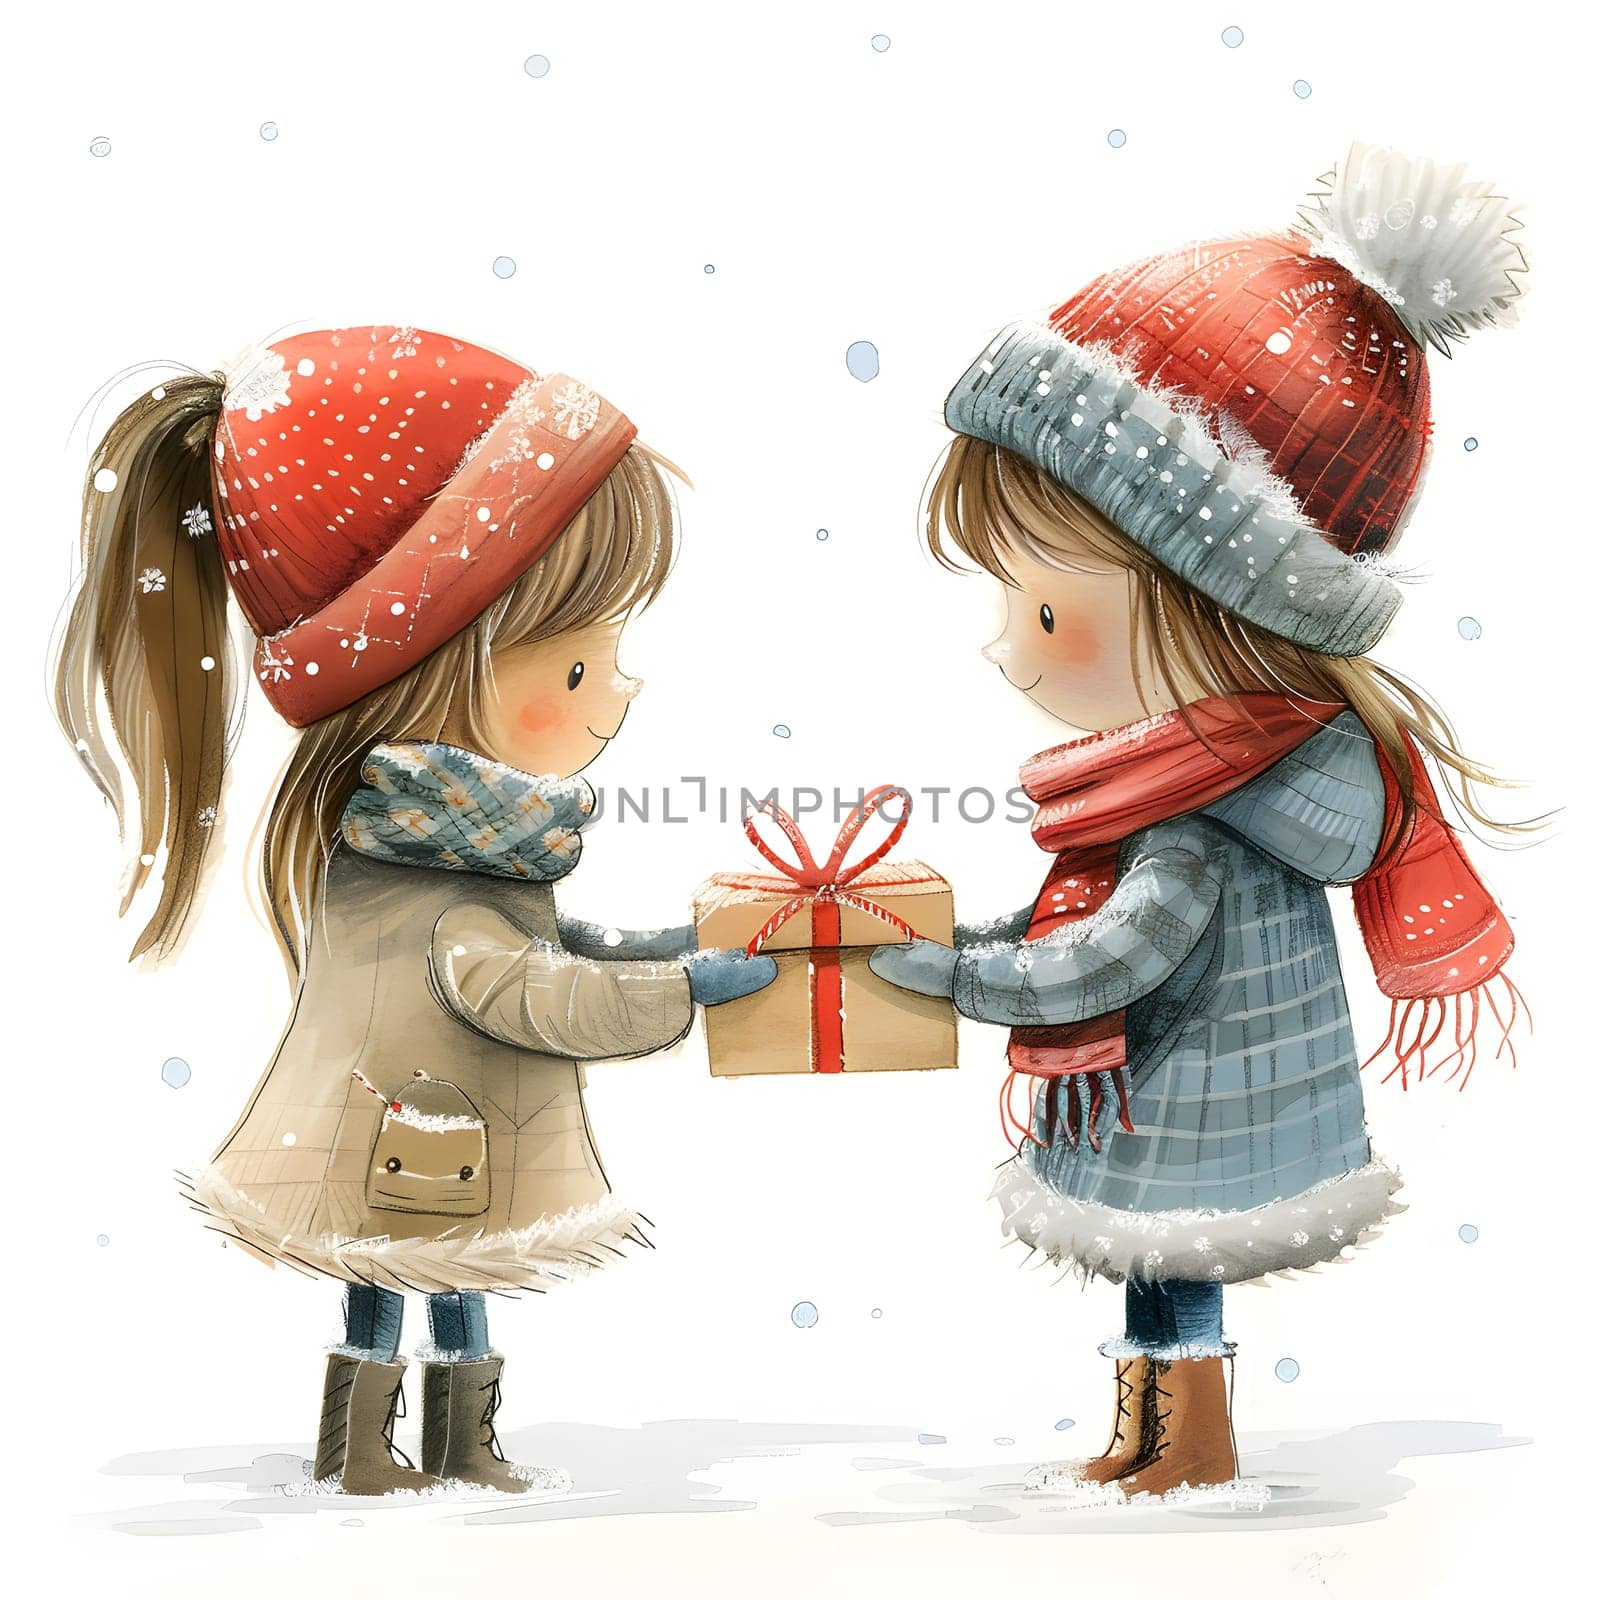 Child sharing a happy cartoon illustration as a gesture of friendship in winter by Nadtochiy